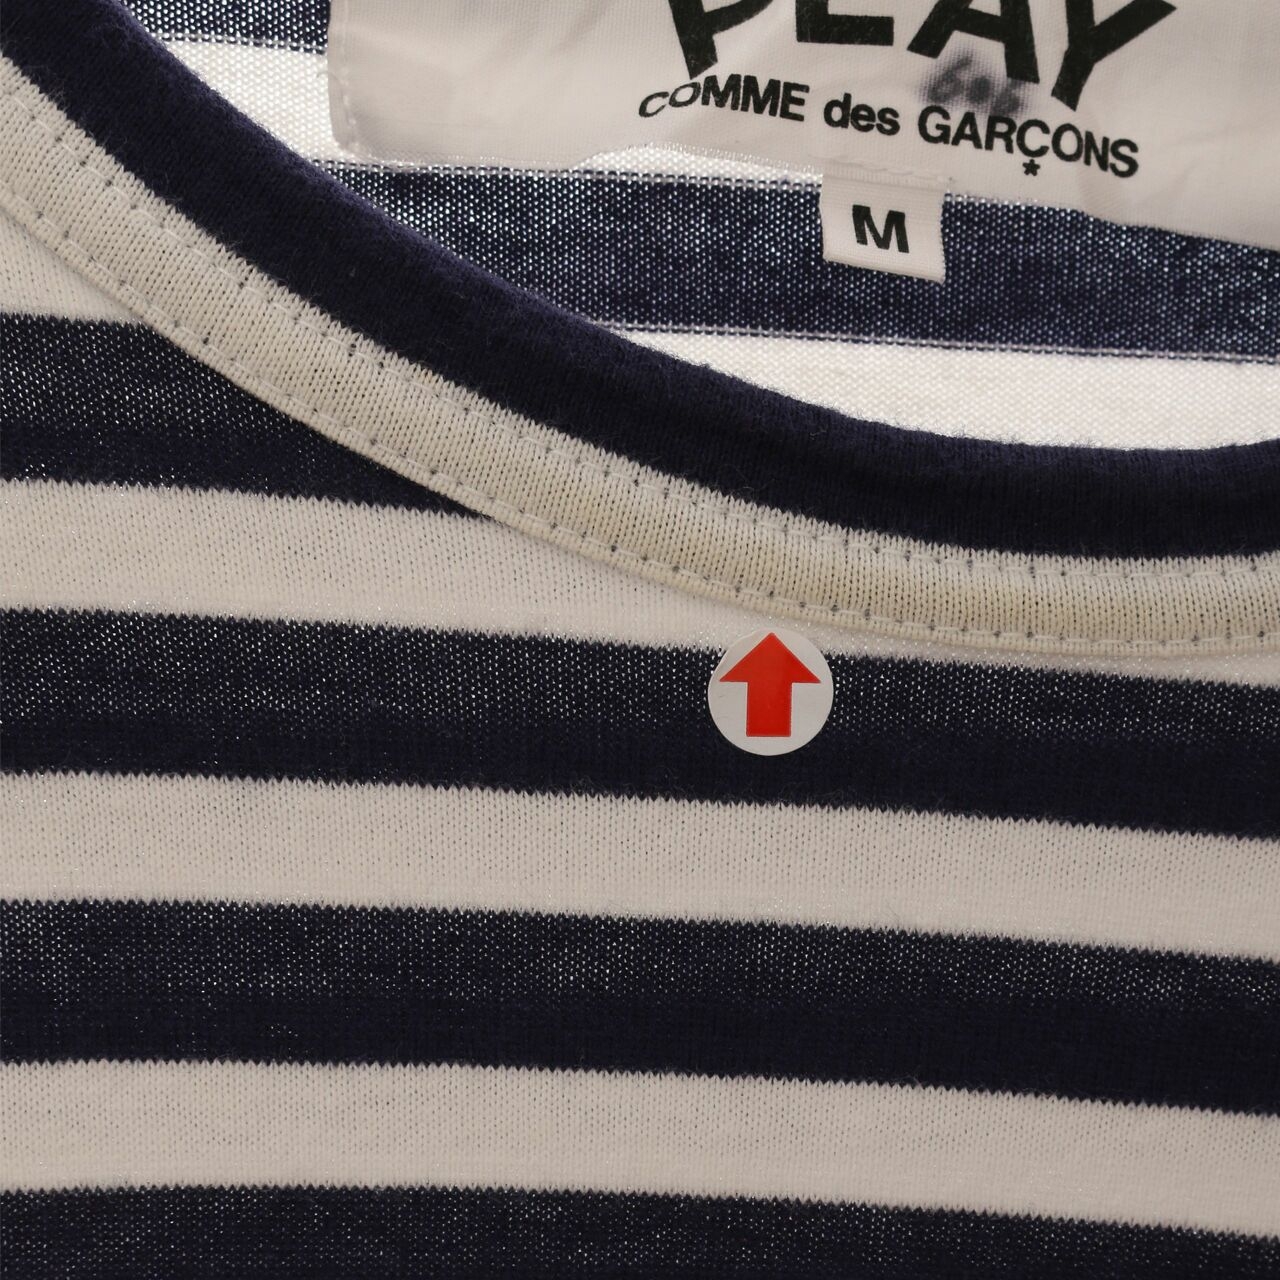 Play by Comme des Garcons Blue Stripes T-Shirt